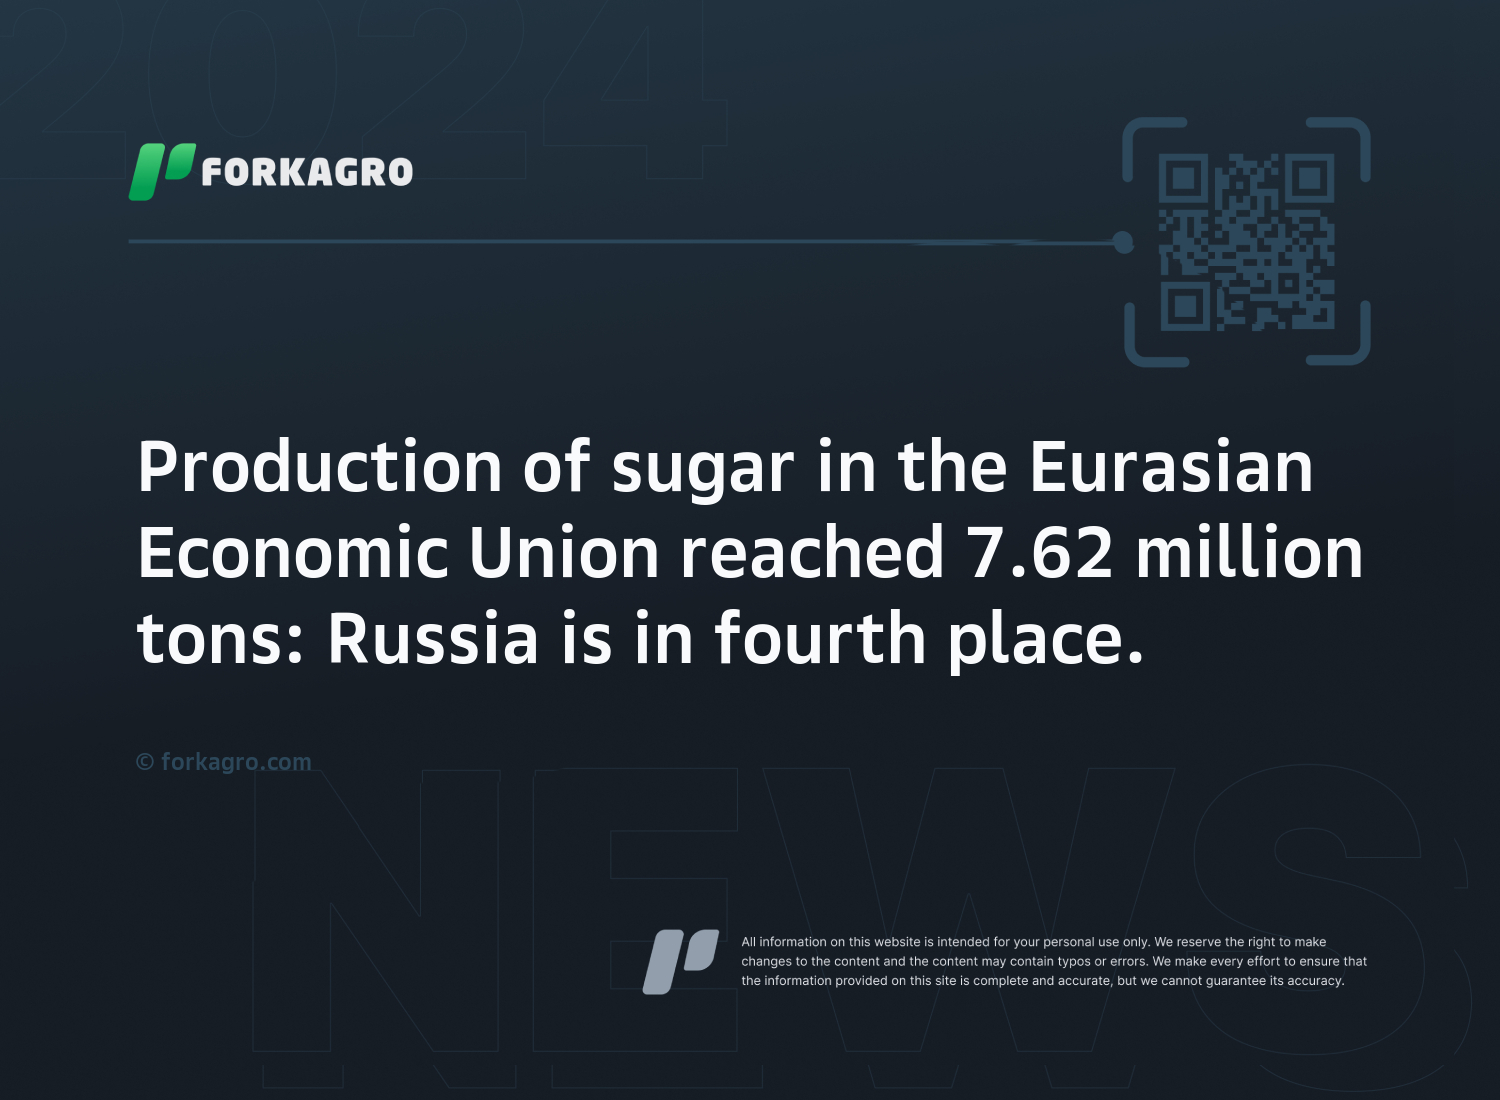 Production of sugar in the Eurasian Economic Union reached 7.62 million tons: Russia is in fourth place.